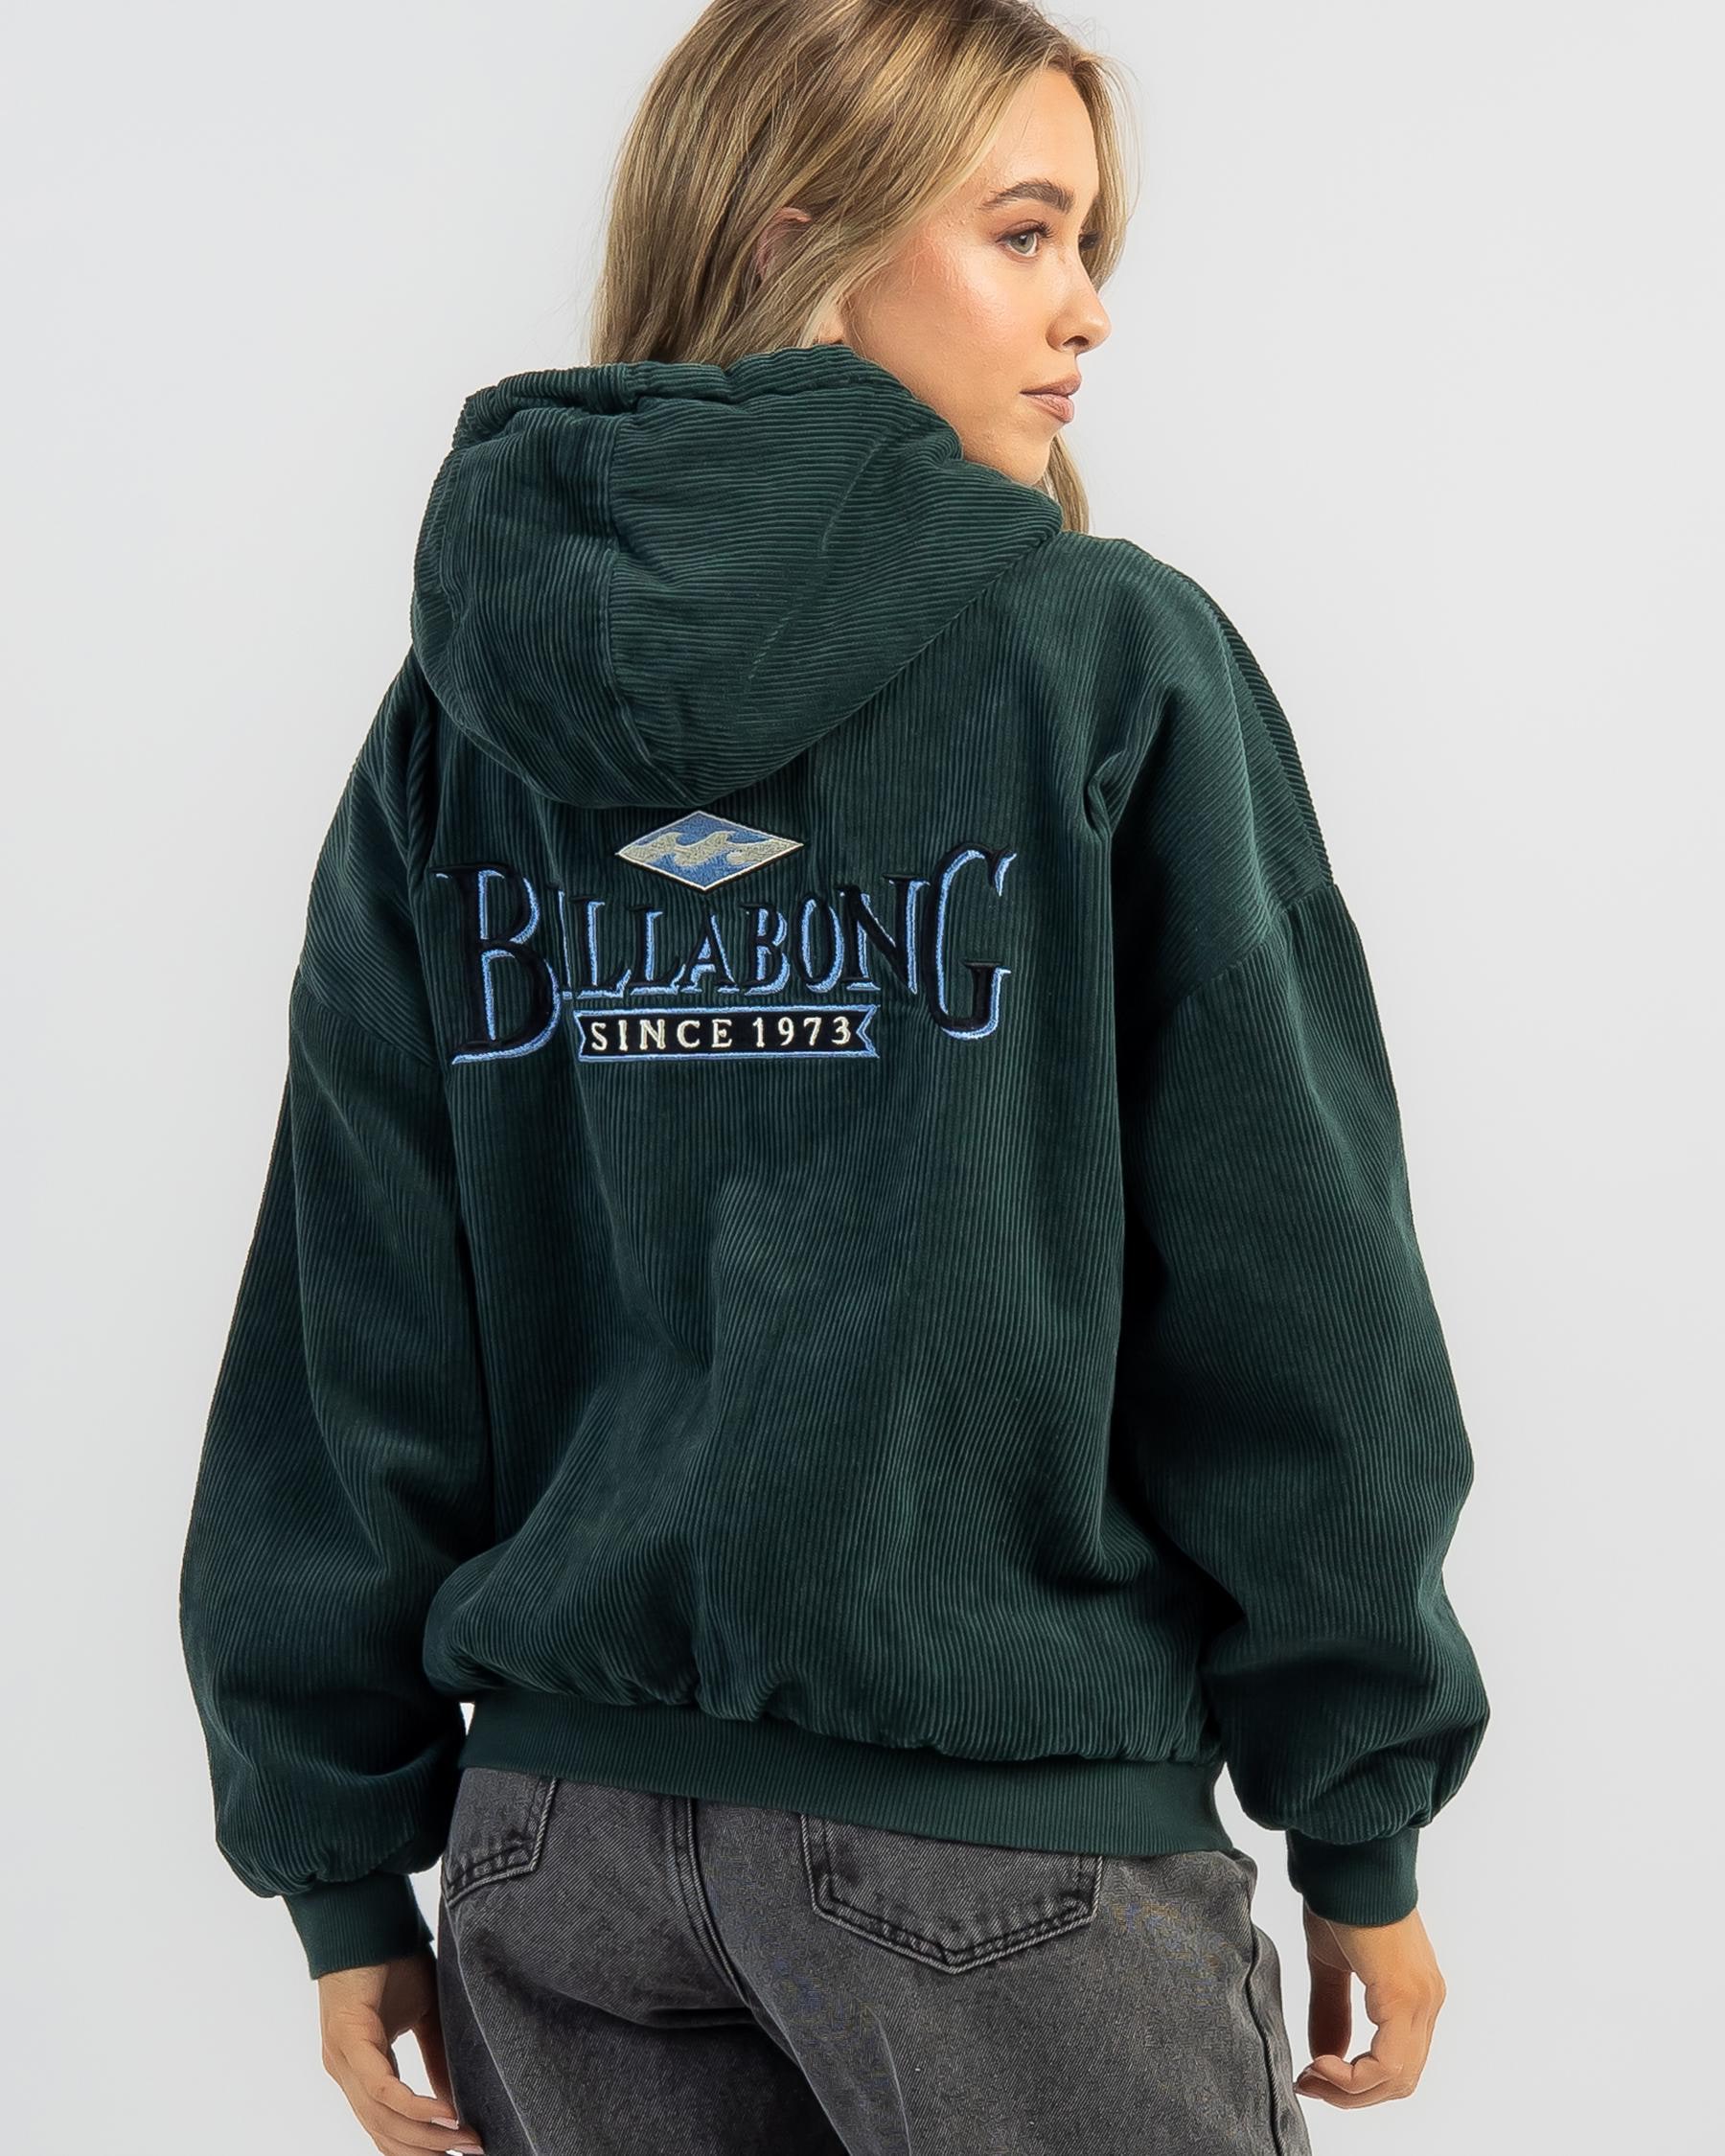 Billabong Set The Tone Hooded Jacket In June Bug - FREE* Shipping ...